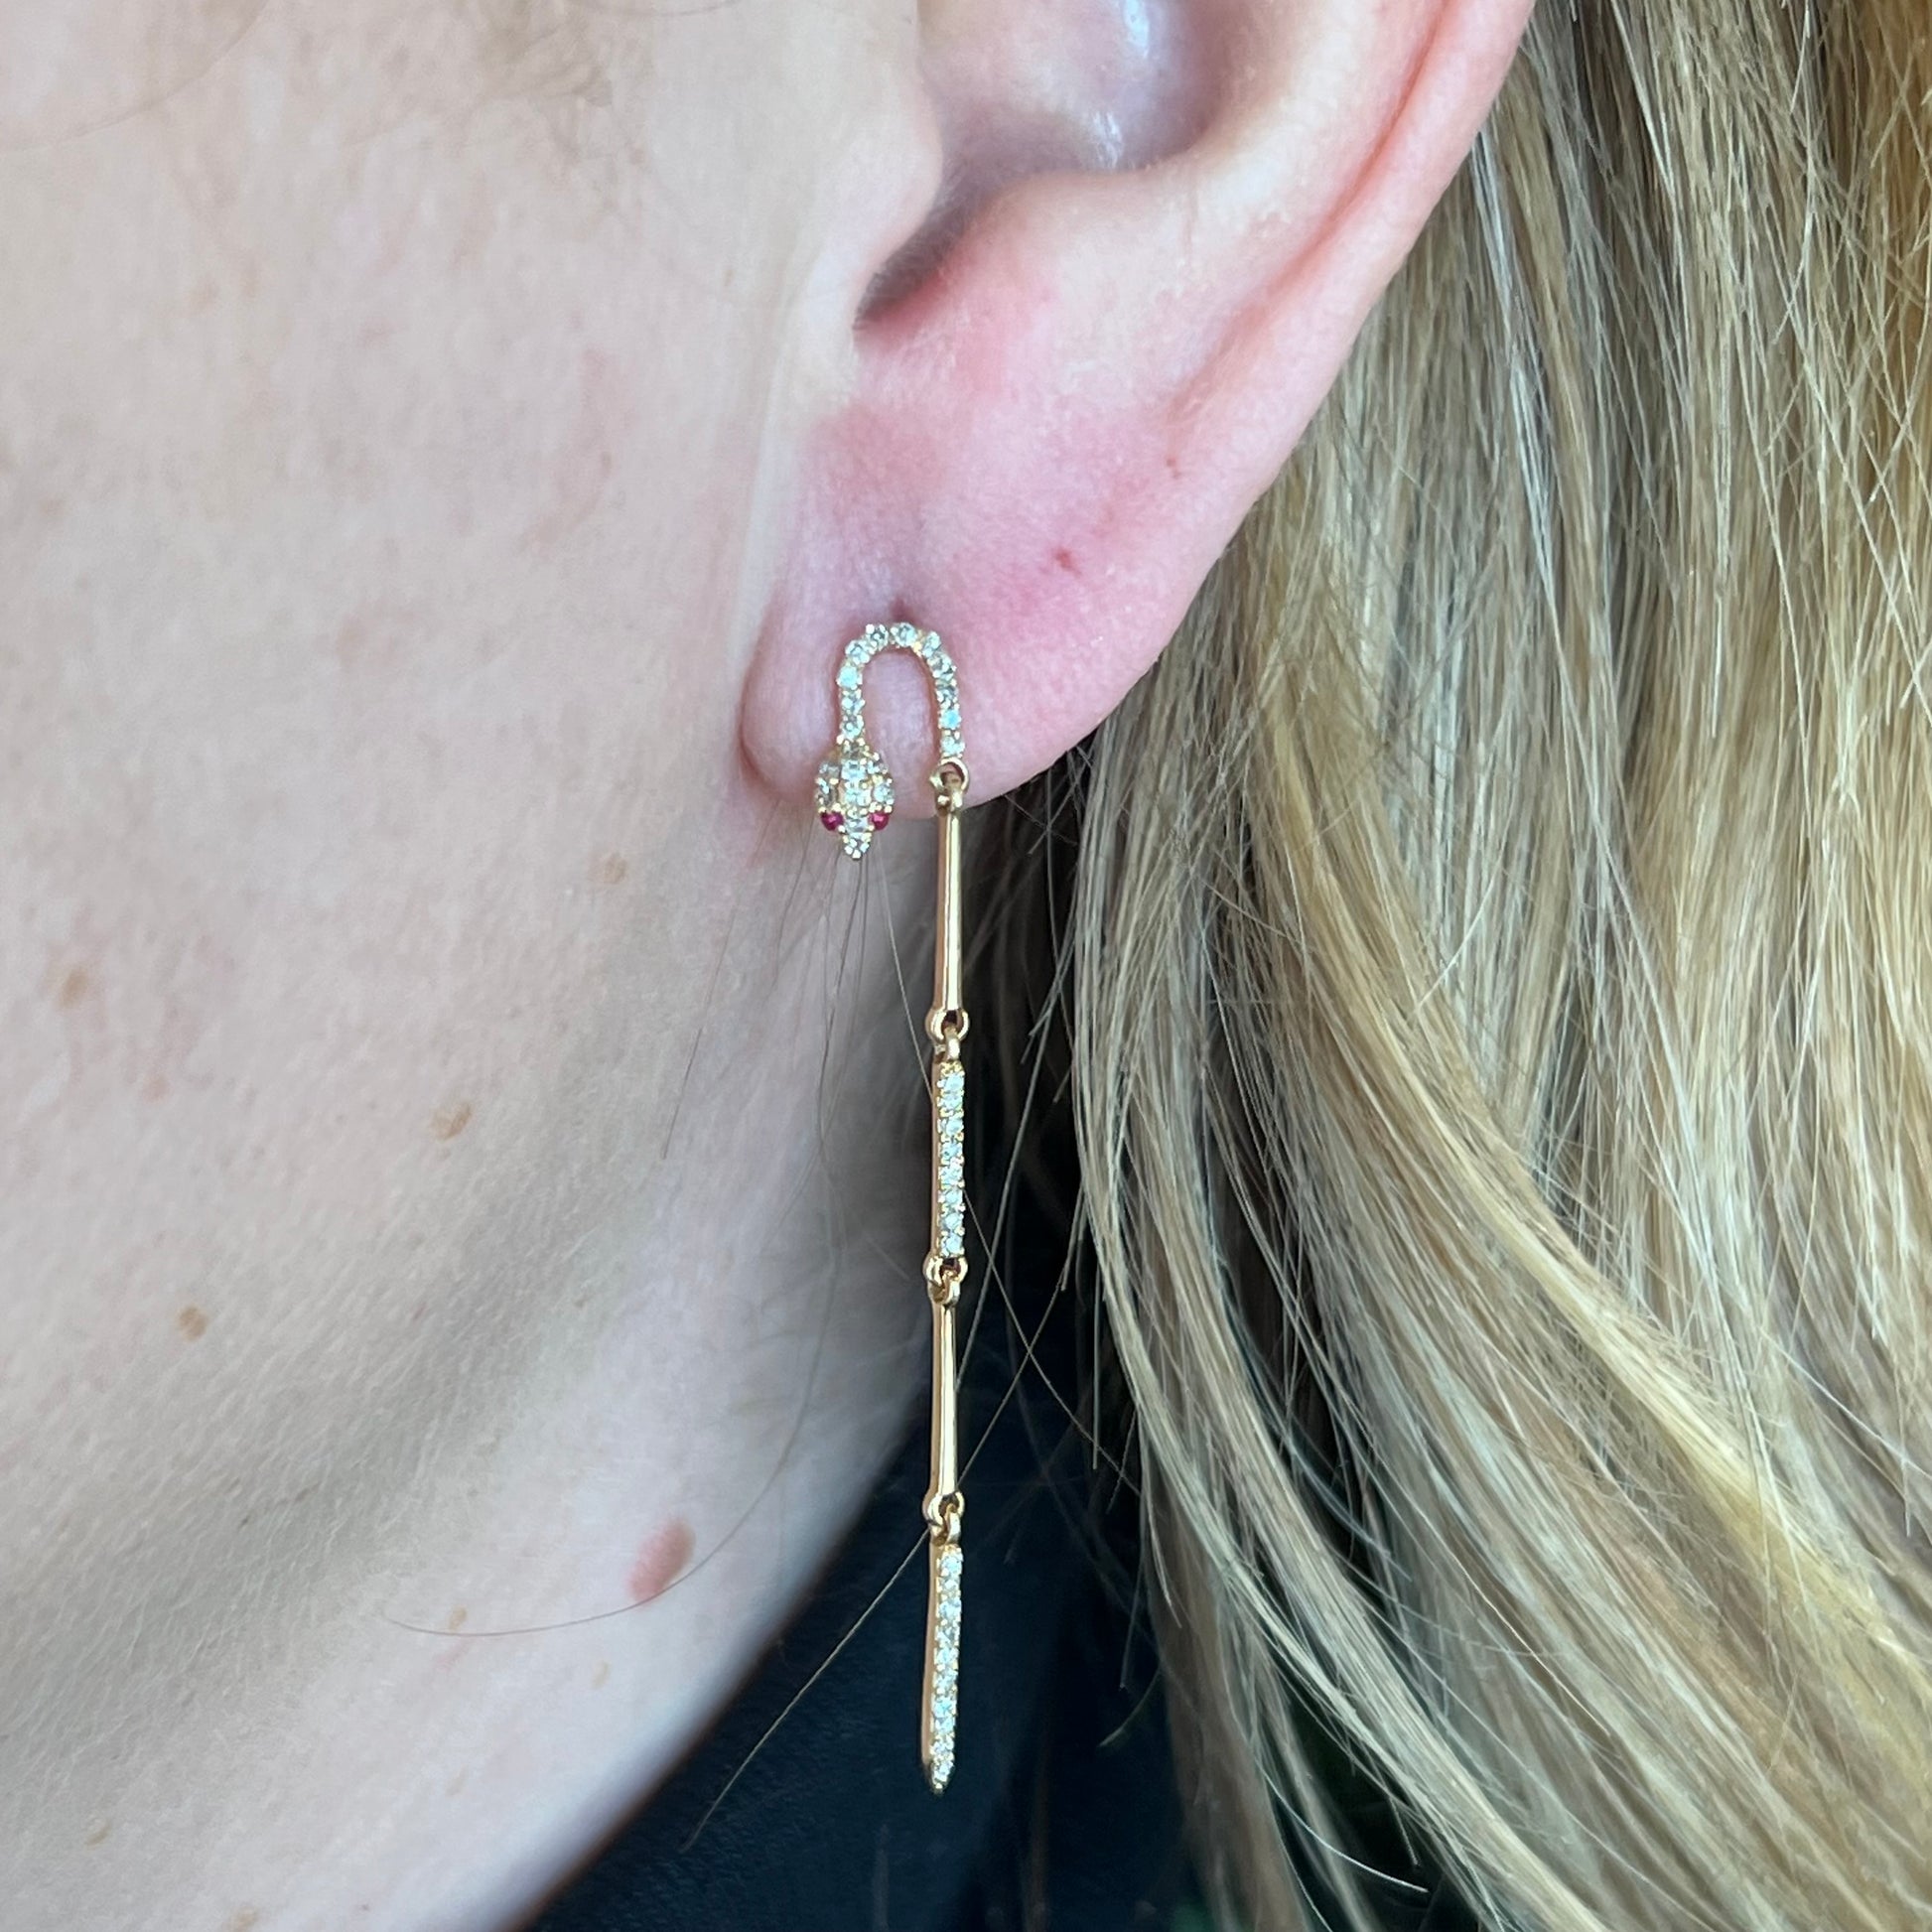 Pave Diamond Snake Earrings in 14k Yellow GoldComposition: 14 Karat Yellow Gold Total Diamond Weight: .35ct Total Gram Weight: 2.0 g Inscription: 14k
      